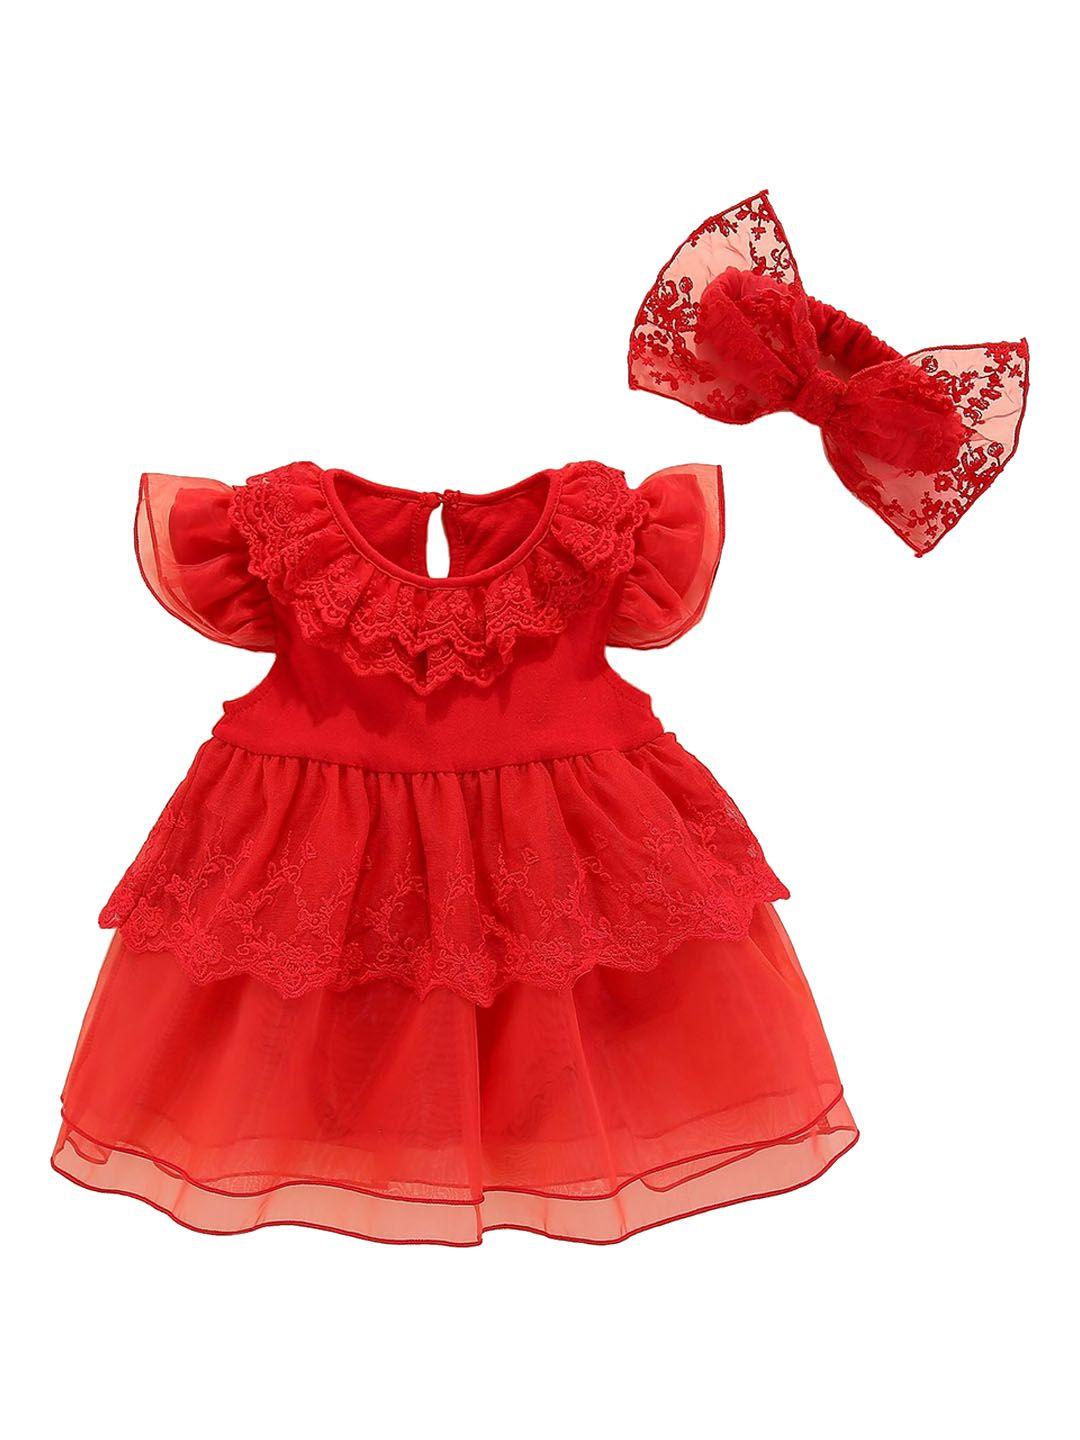 stylecast-infants-girls-cotton-rompers